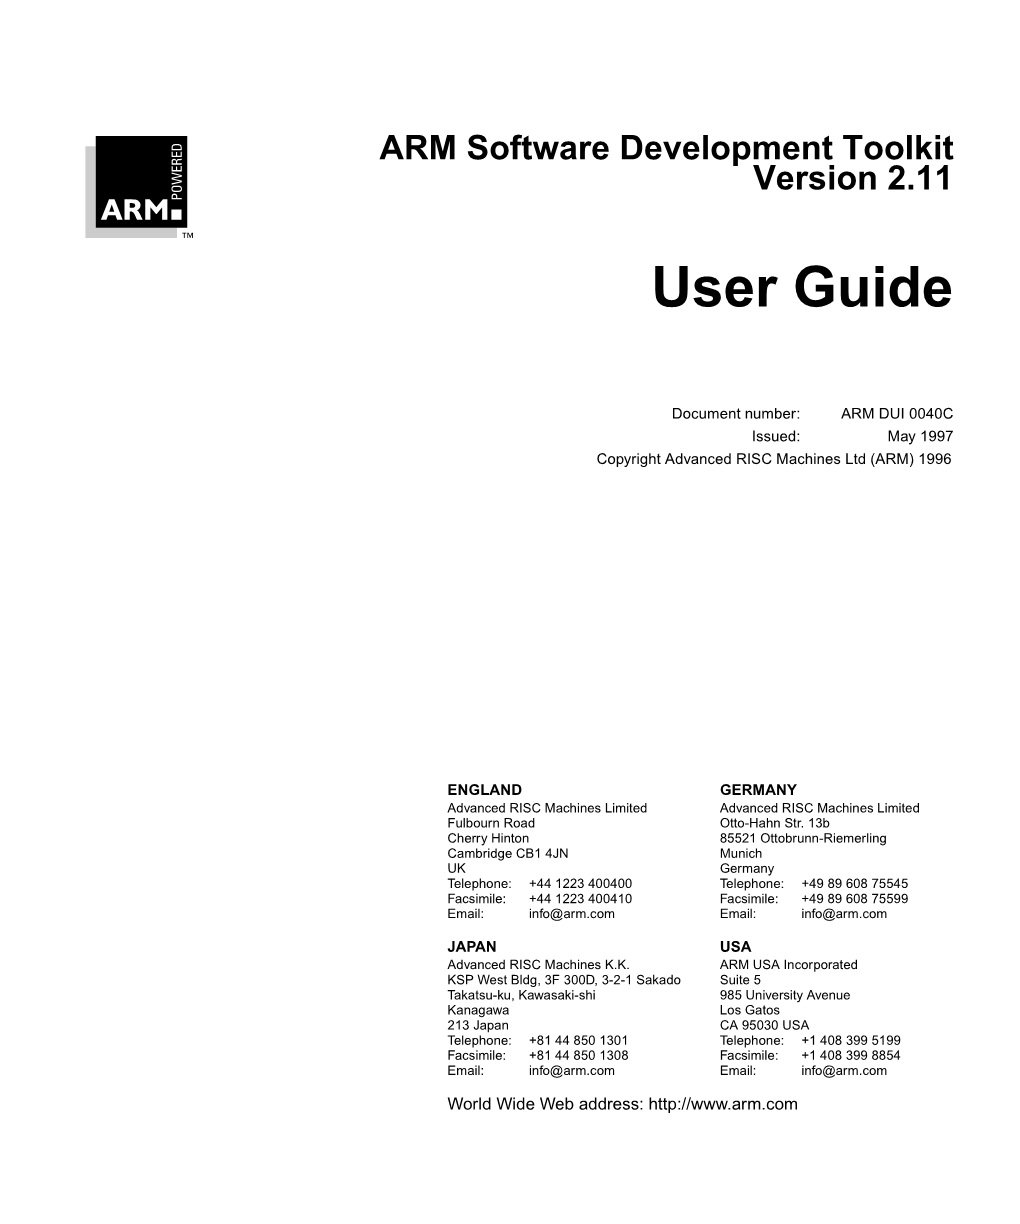 ARM Software Development Toolkit Version 2.11 User Guide